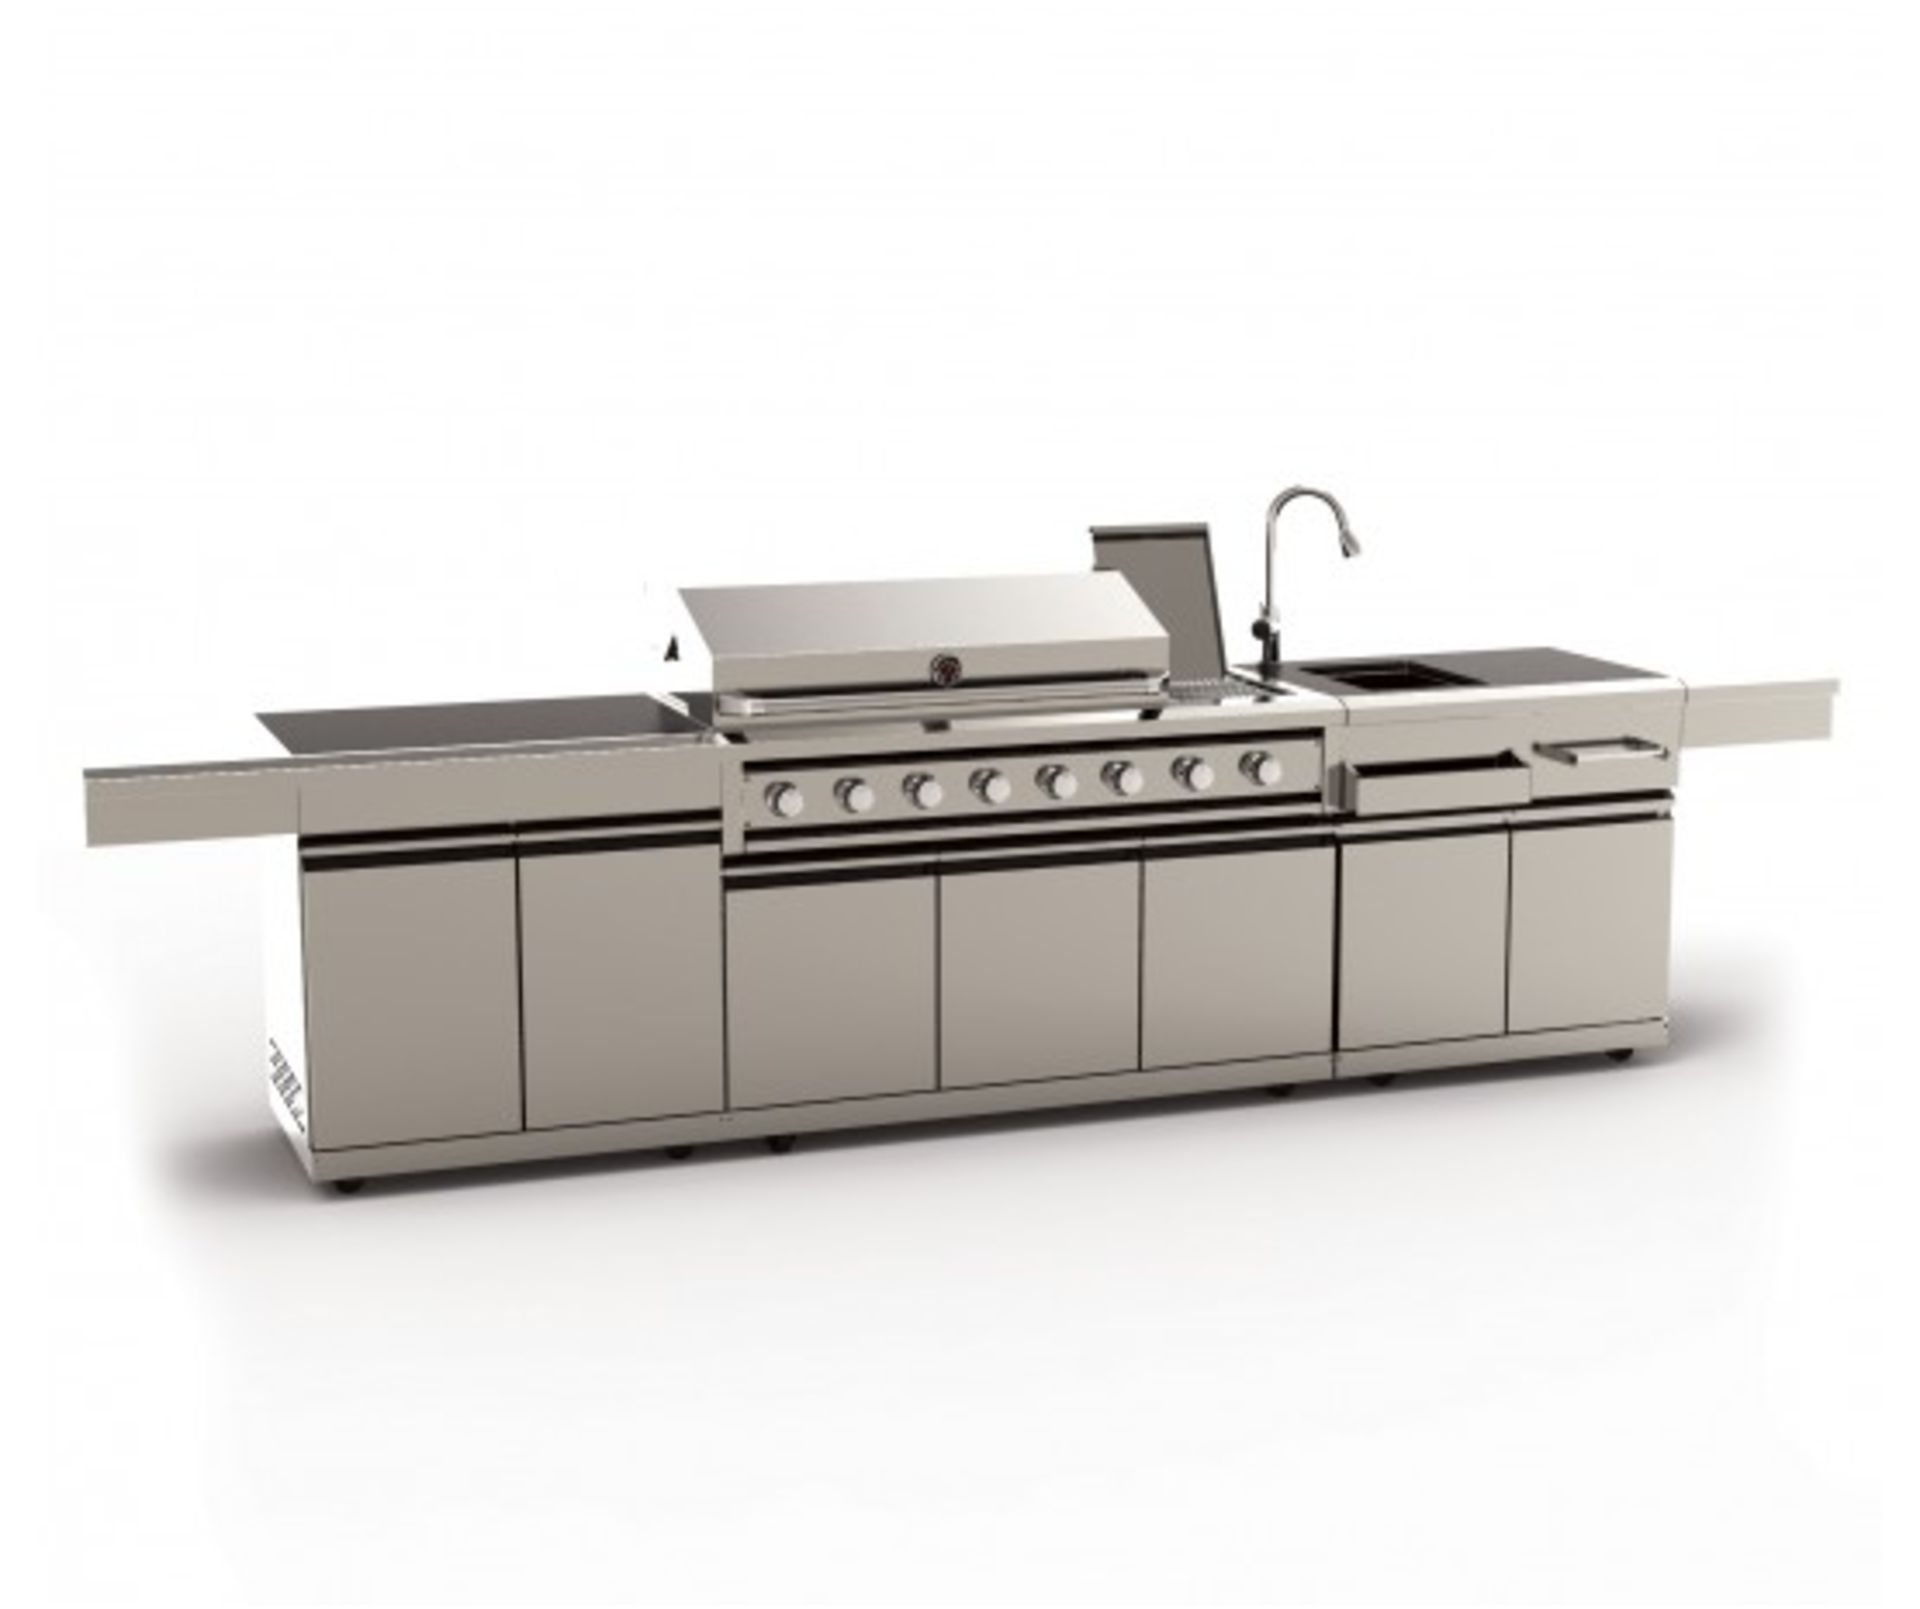 BBQ suite-gas bbq, sink and refrigerator + cabinets - 28.1kW - 3900W x 630D x 1160H - GAS